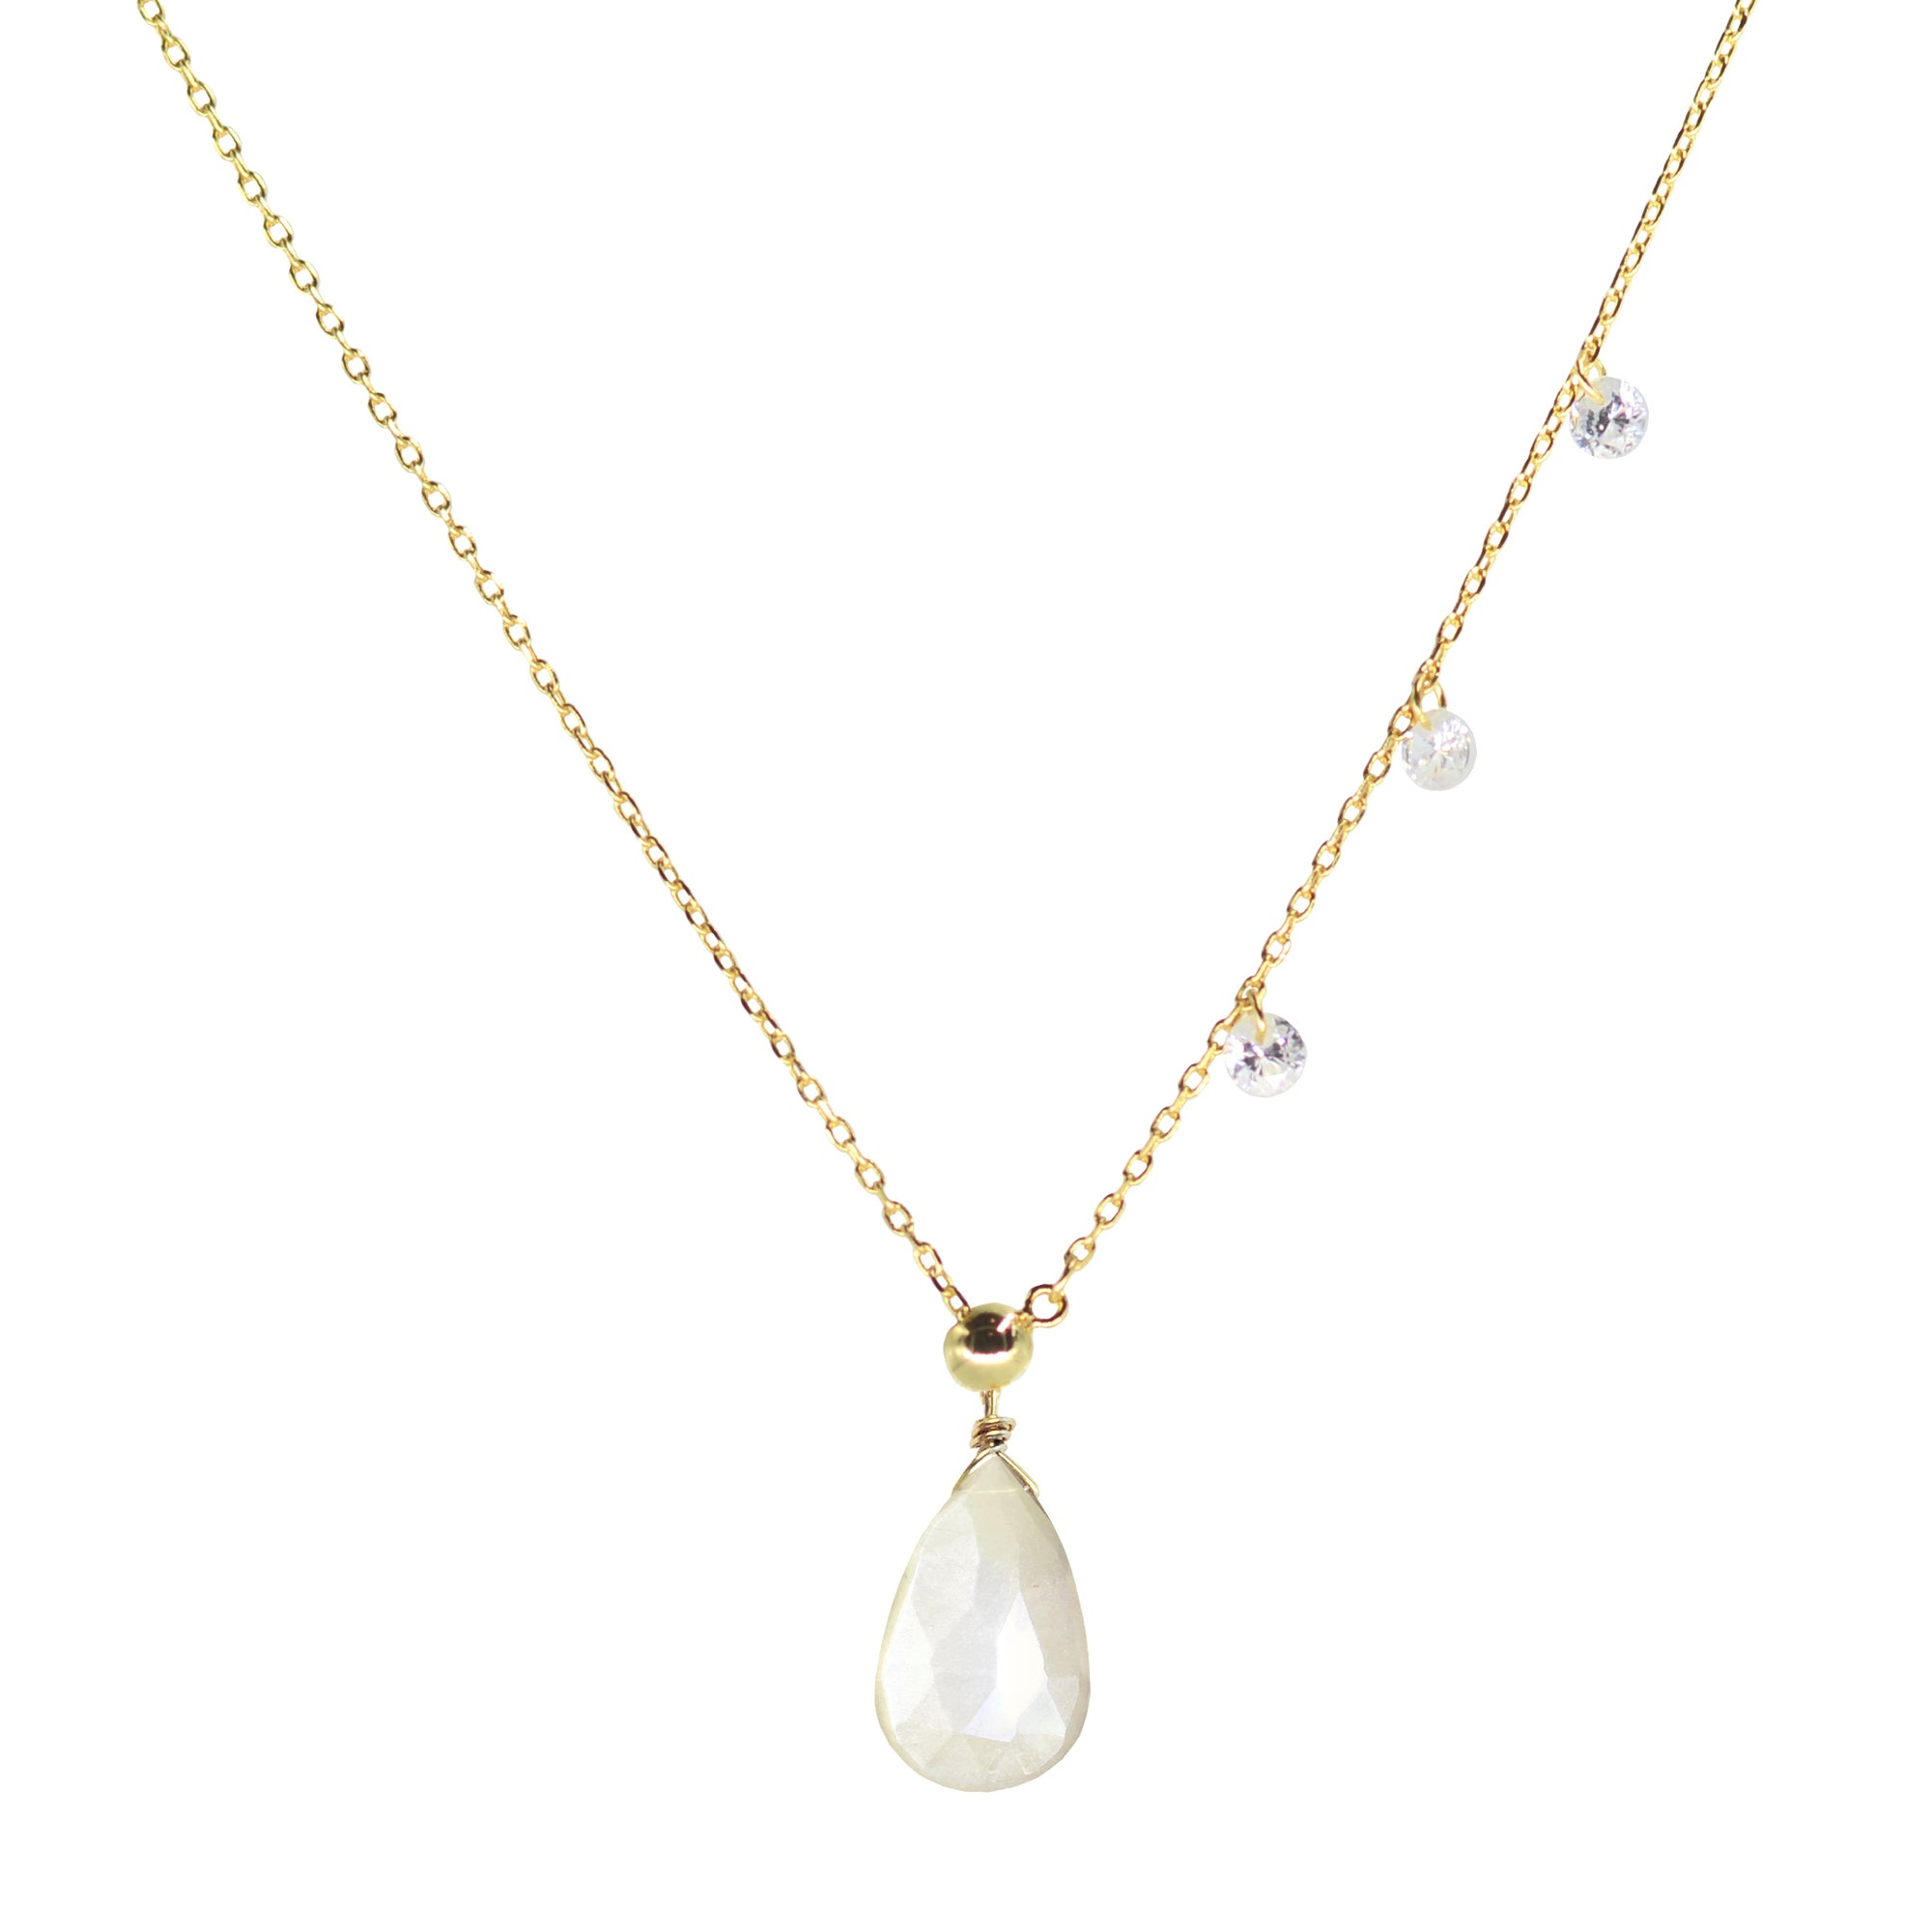 double slider lariat necklace with mystic champagne moonstone drop